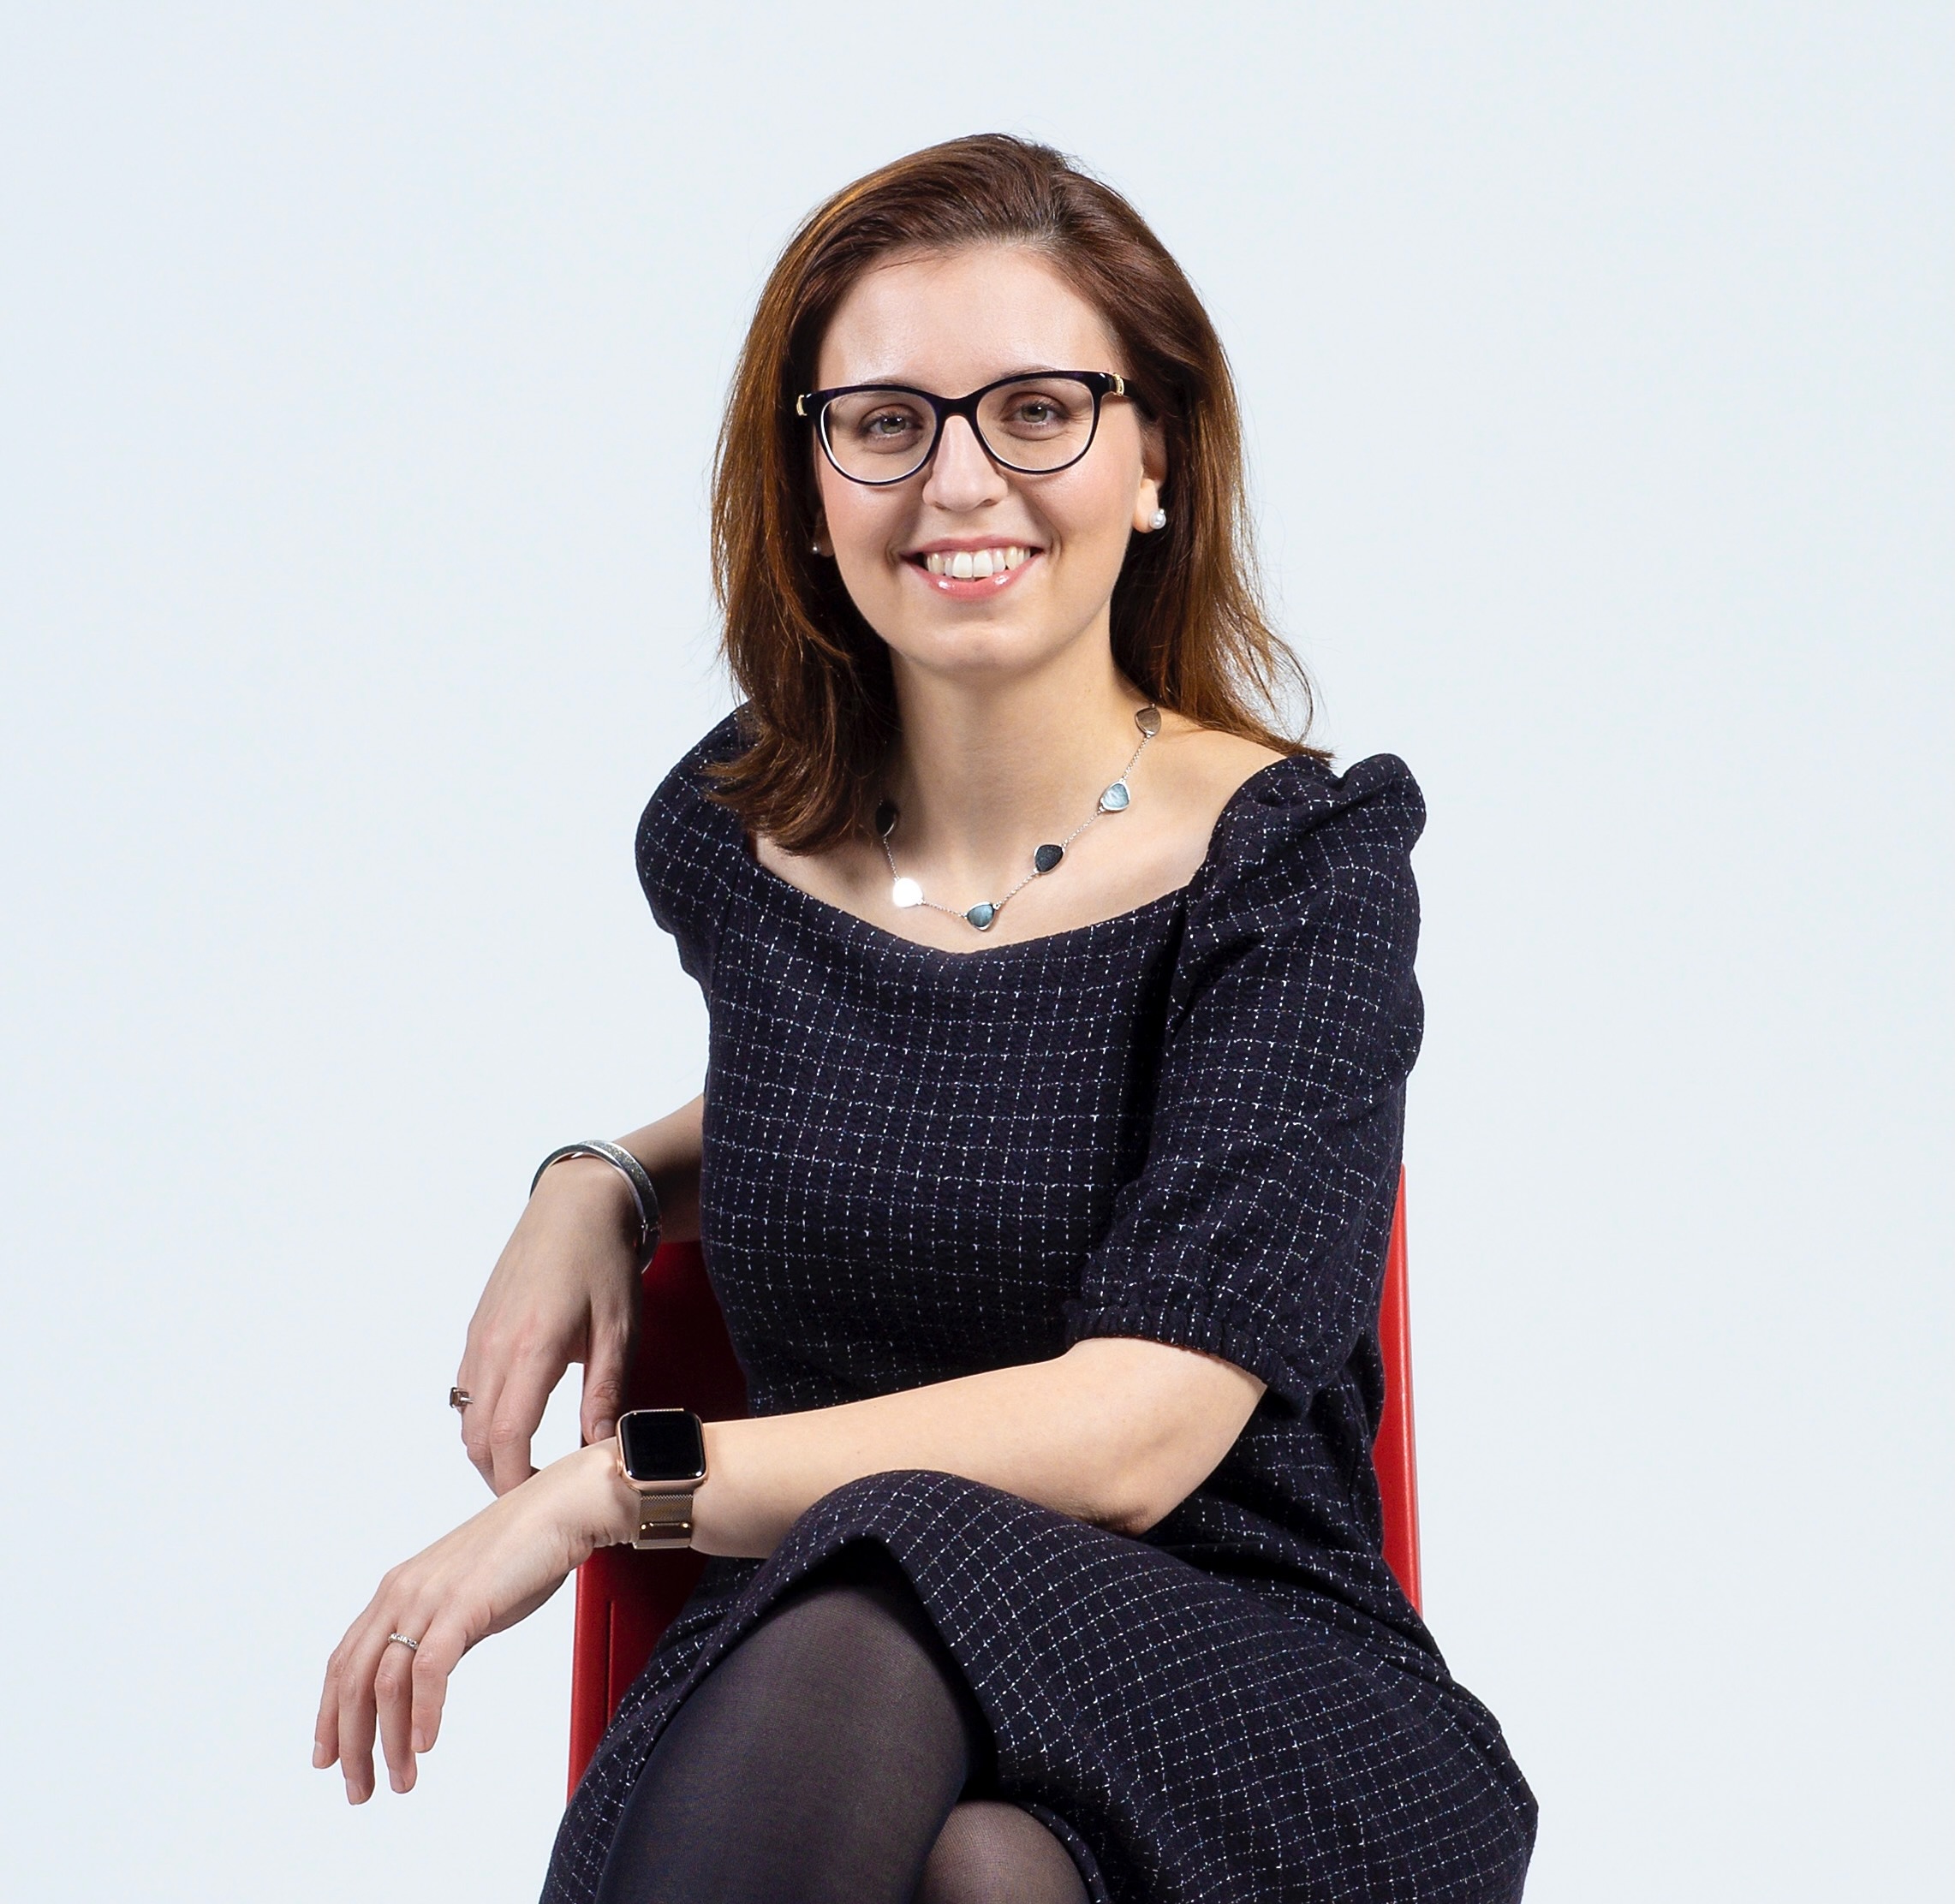 SIRIO enhances strategy for small and medium nutra innovators as Lonza’s Sara Lesina joins as GM in Europe